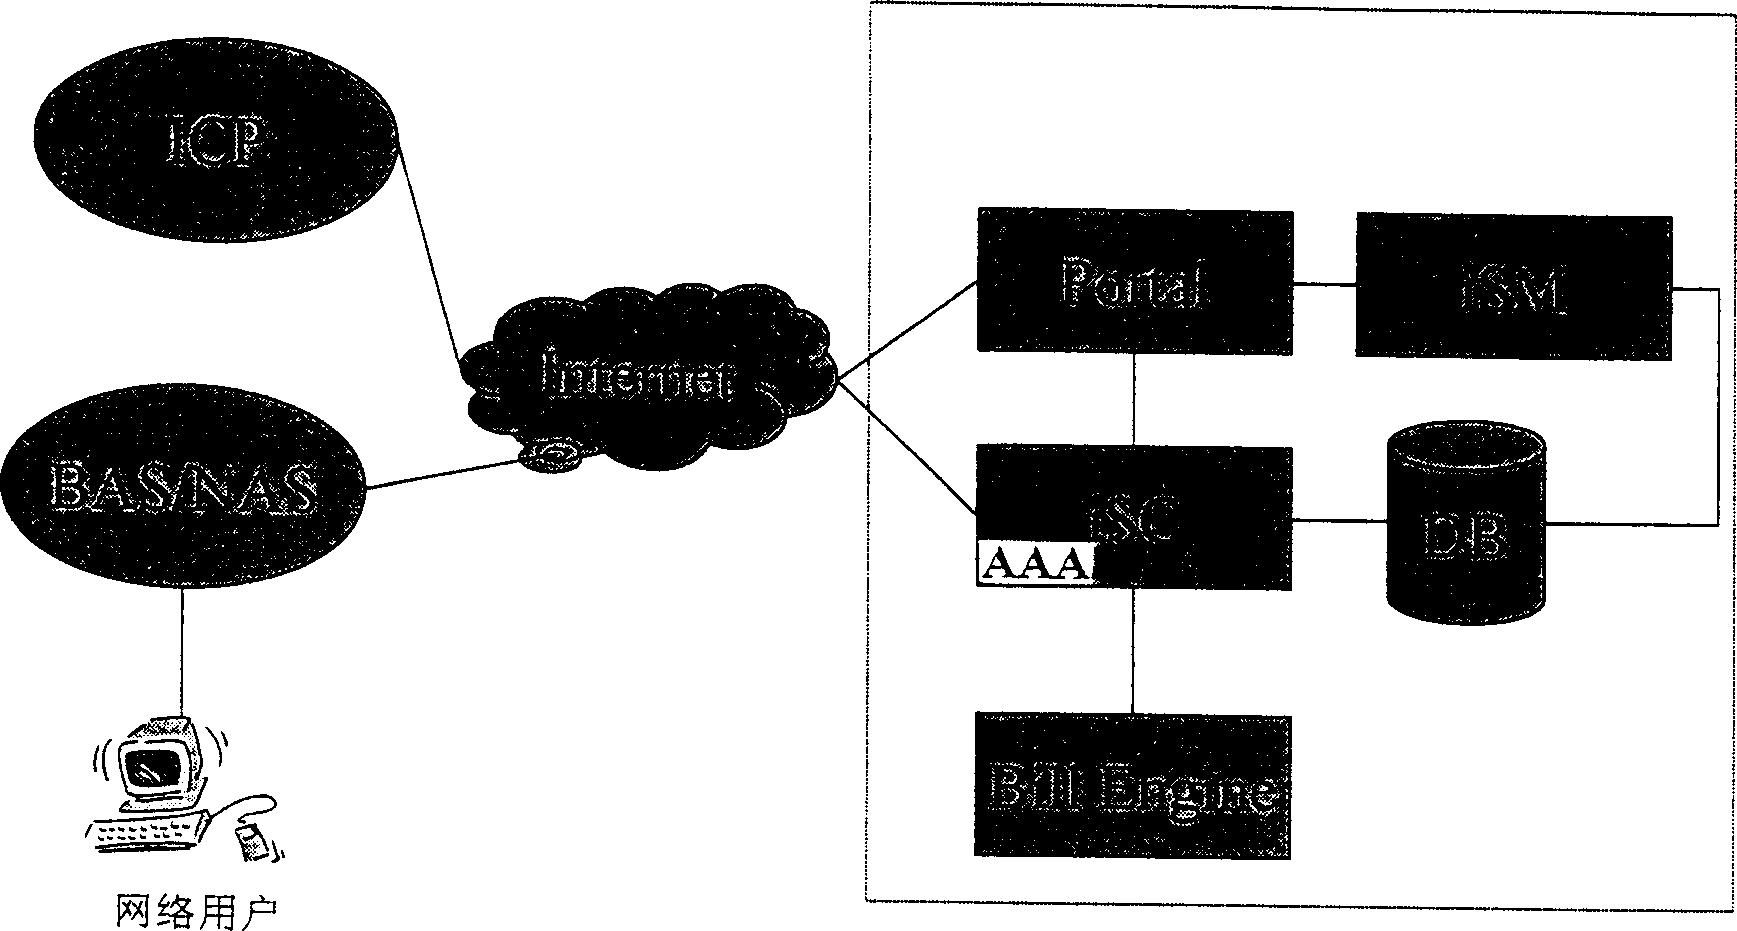 Method of realizing Internet contents paying